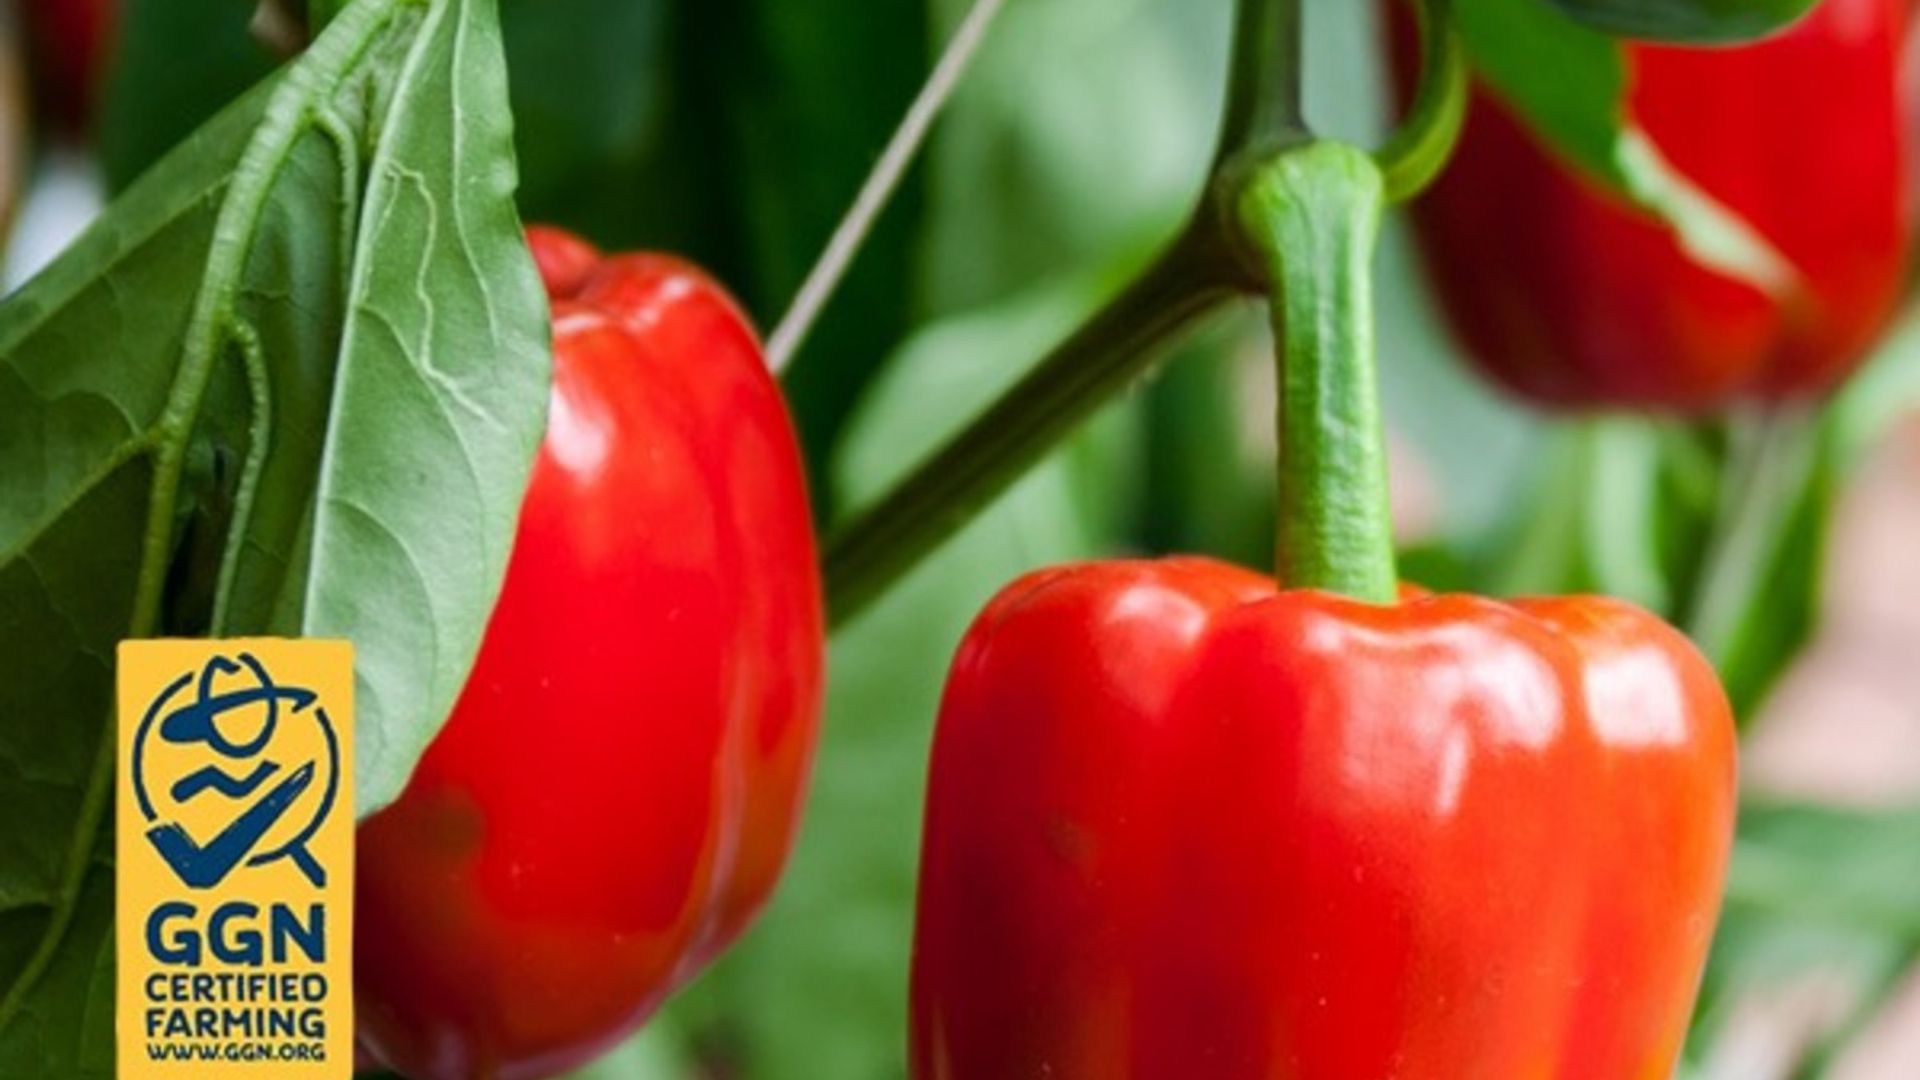 Image of red peppers with the GGN label